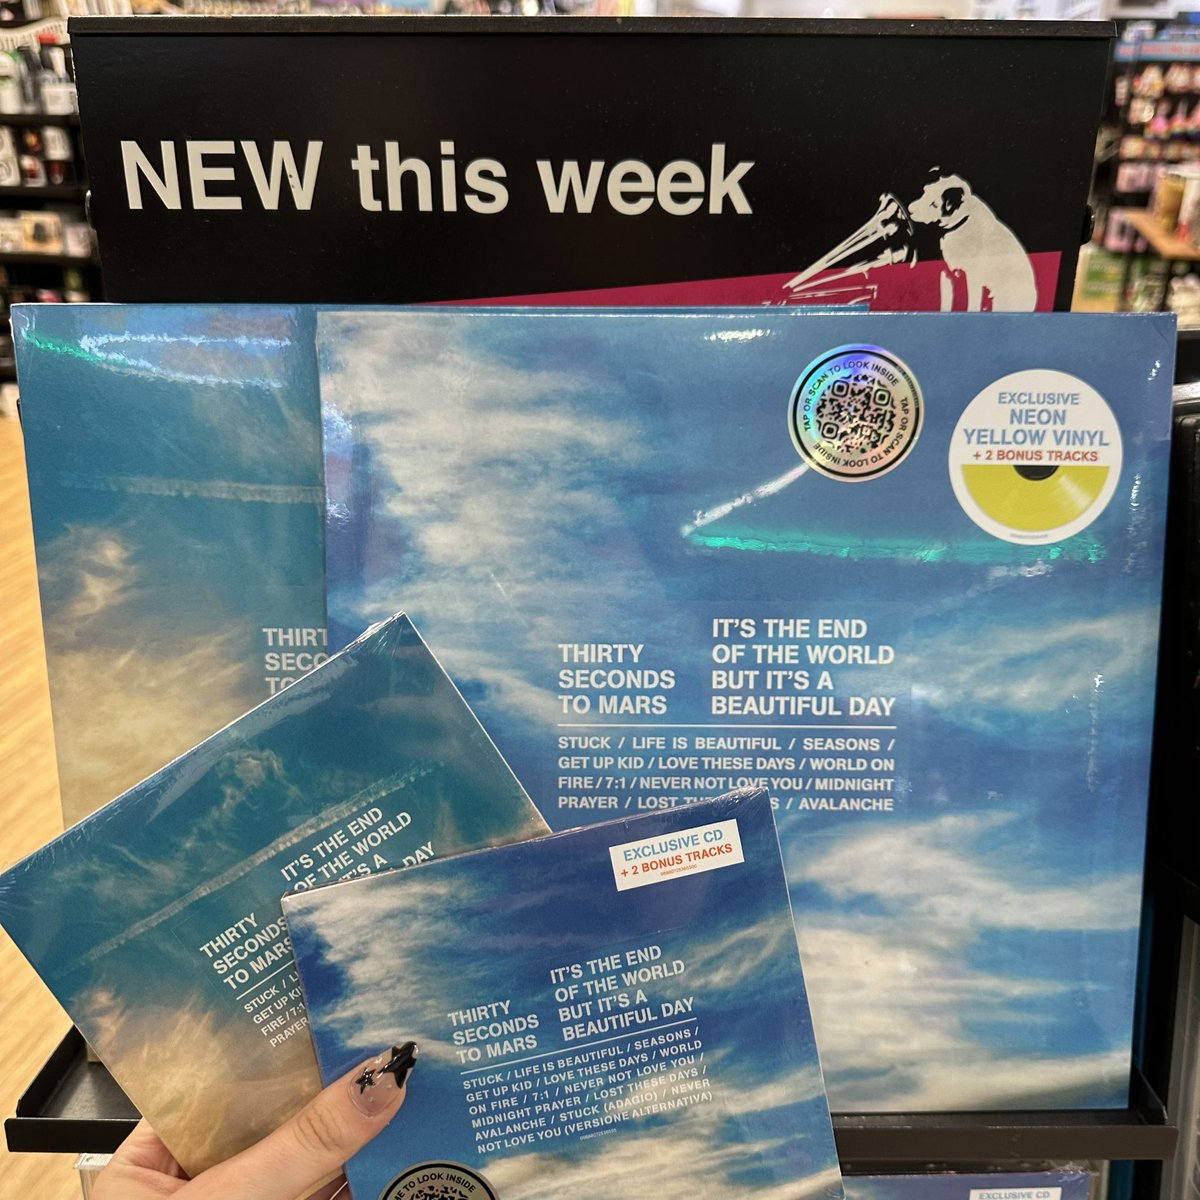 New Music Release! NCT Dreams ISTJ is out now, we have all the member digipacks, so come and collect your bias! 🌟 Thirty Seconds to Mars new release is also out! 💫😁 #hmv #hmvluton #nctdream #nct #nctdreamistj #istj #thirtysecondstomars #newrelease